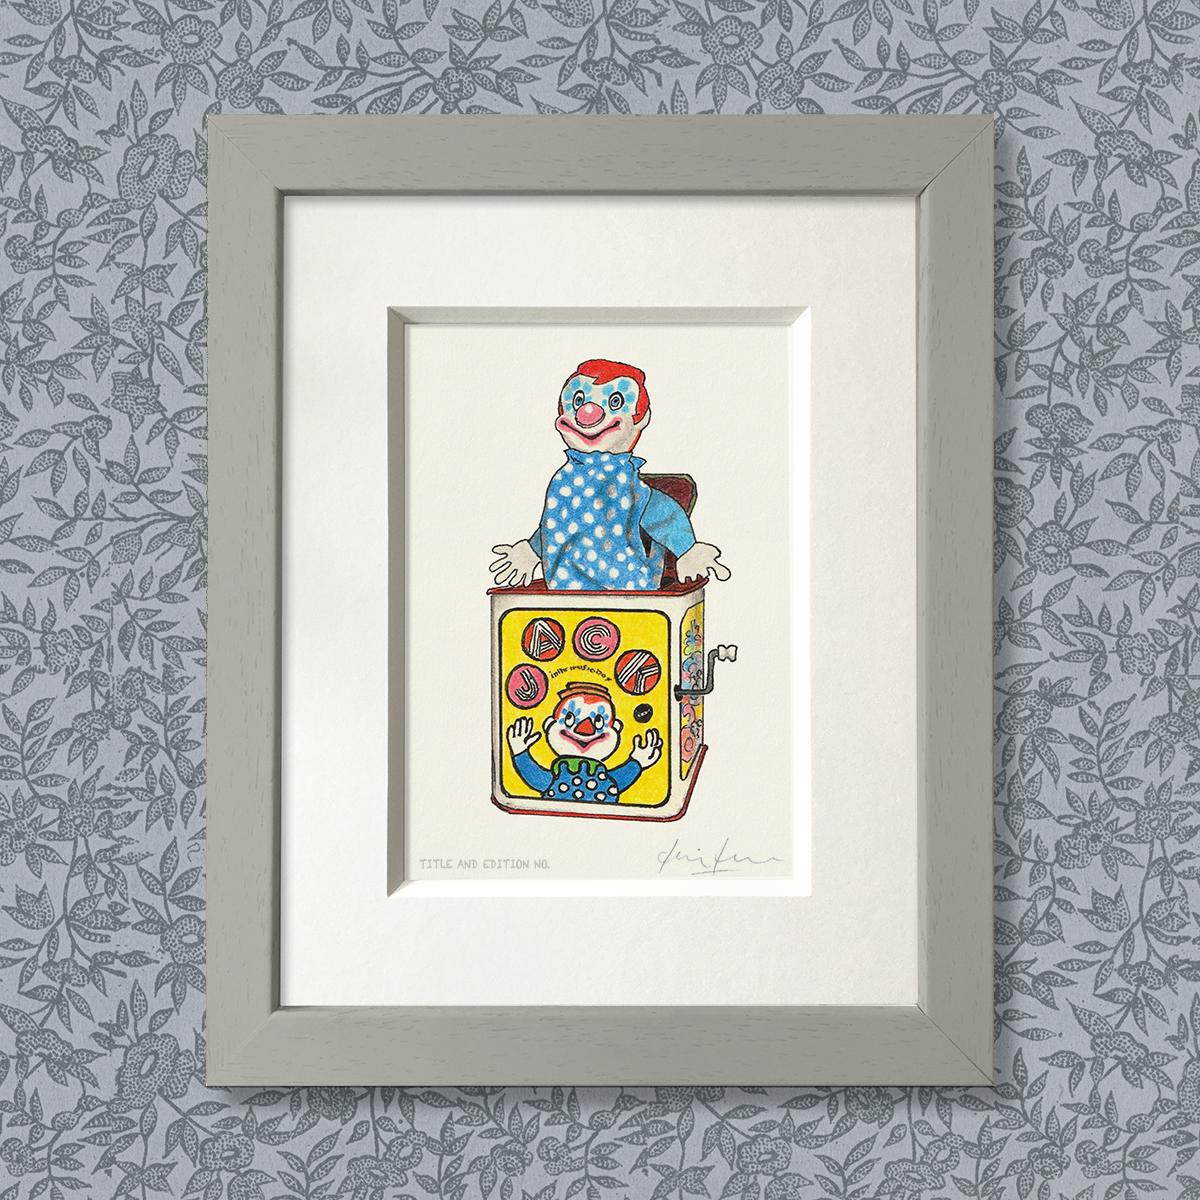 Limited edition print from a pen, ink and coloured pencil drawing of a Teddy Bear in a grey frame